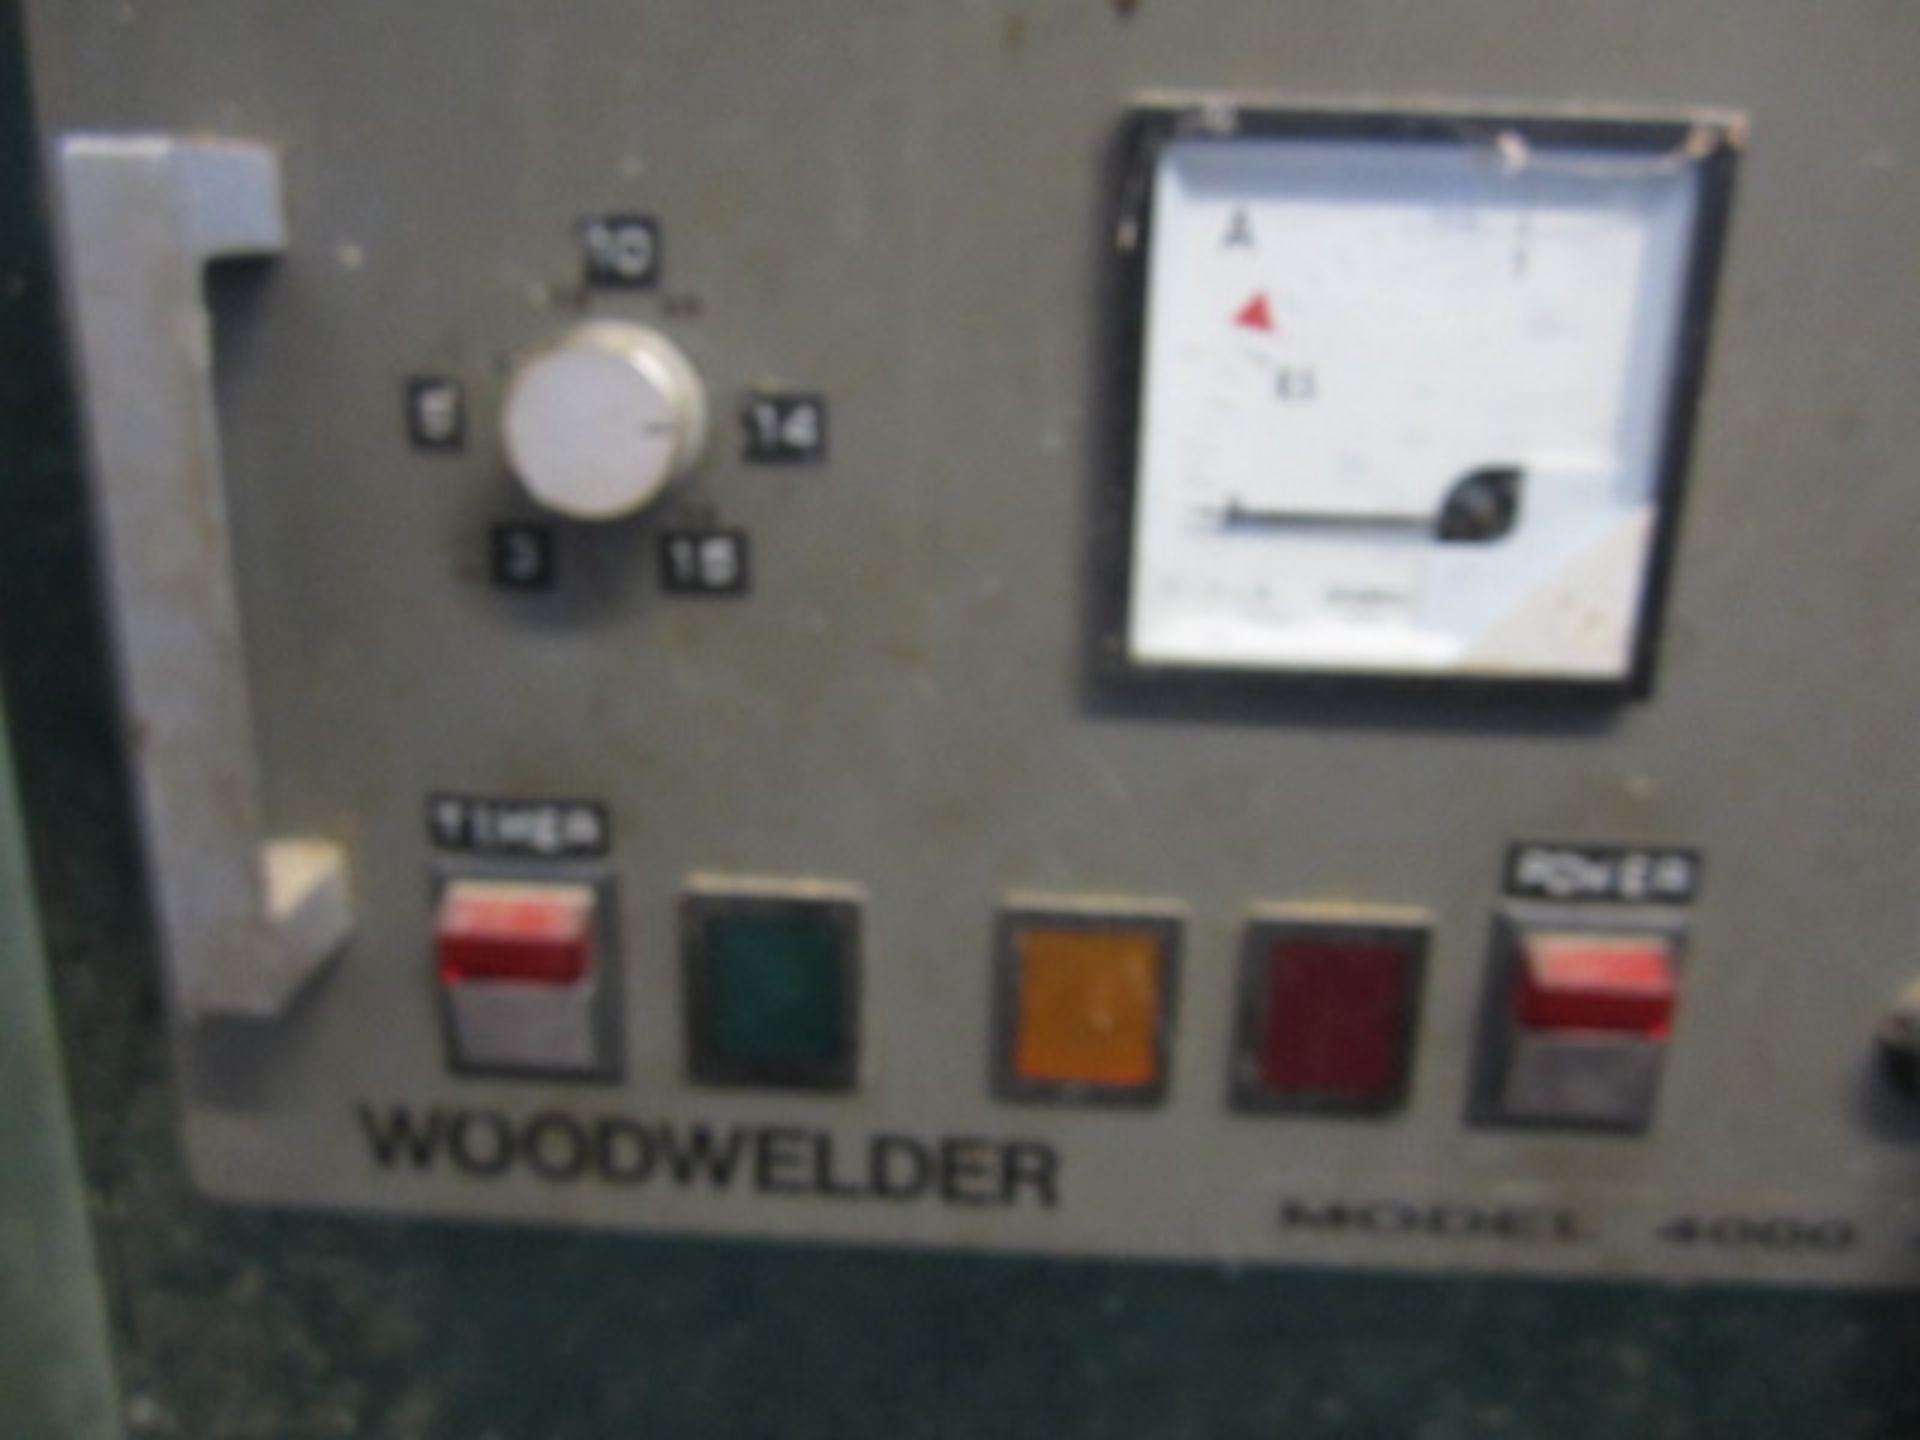 Wood welder, model 4000 - unsure of working condition - Image 2 of 3